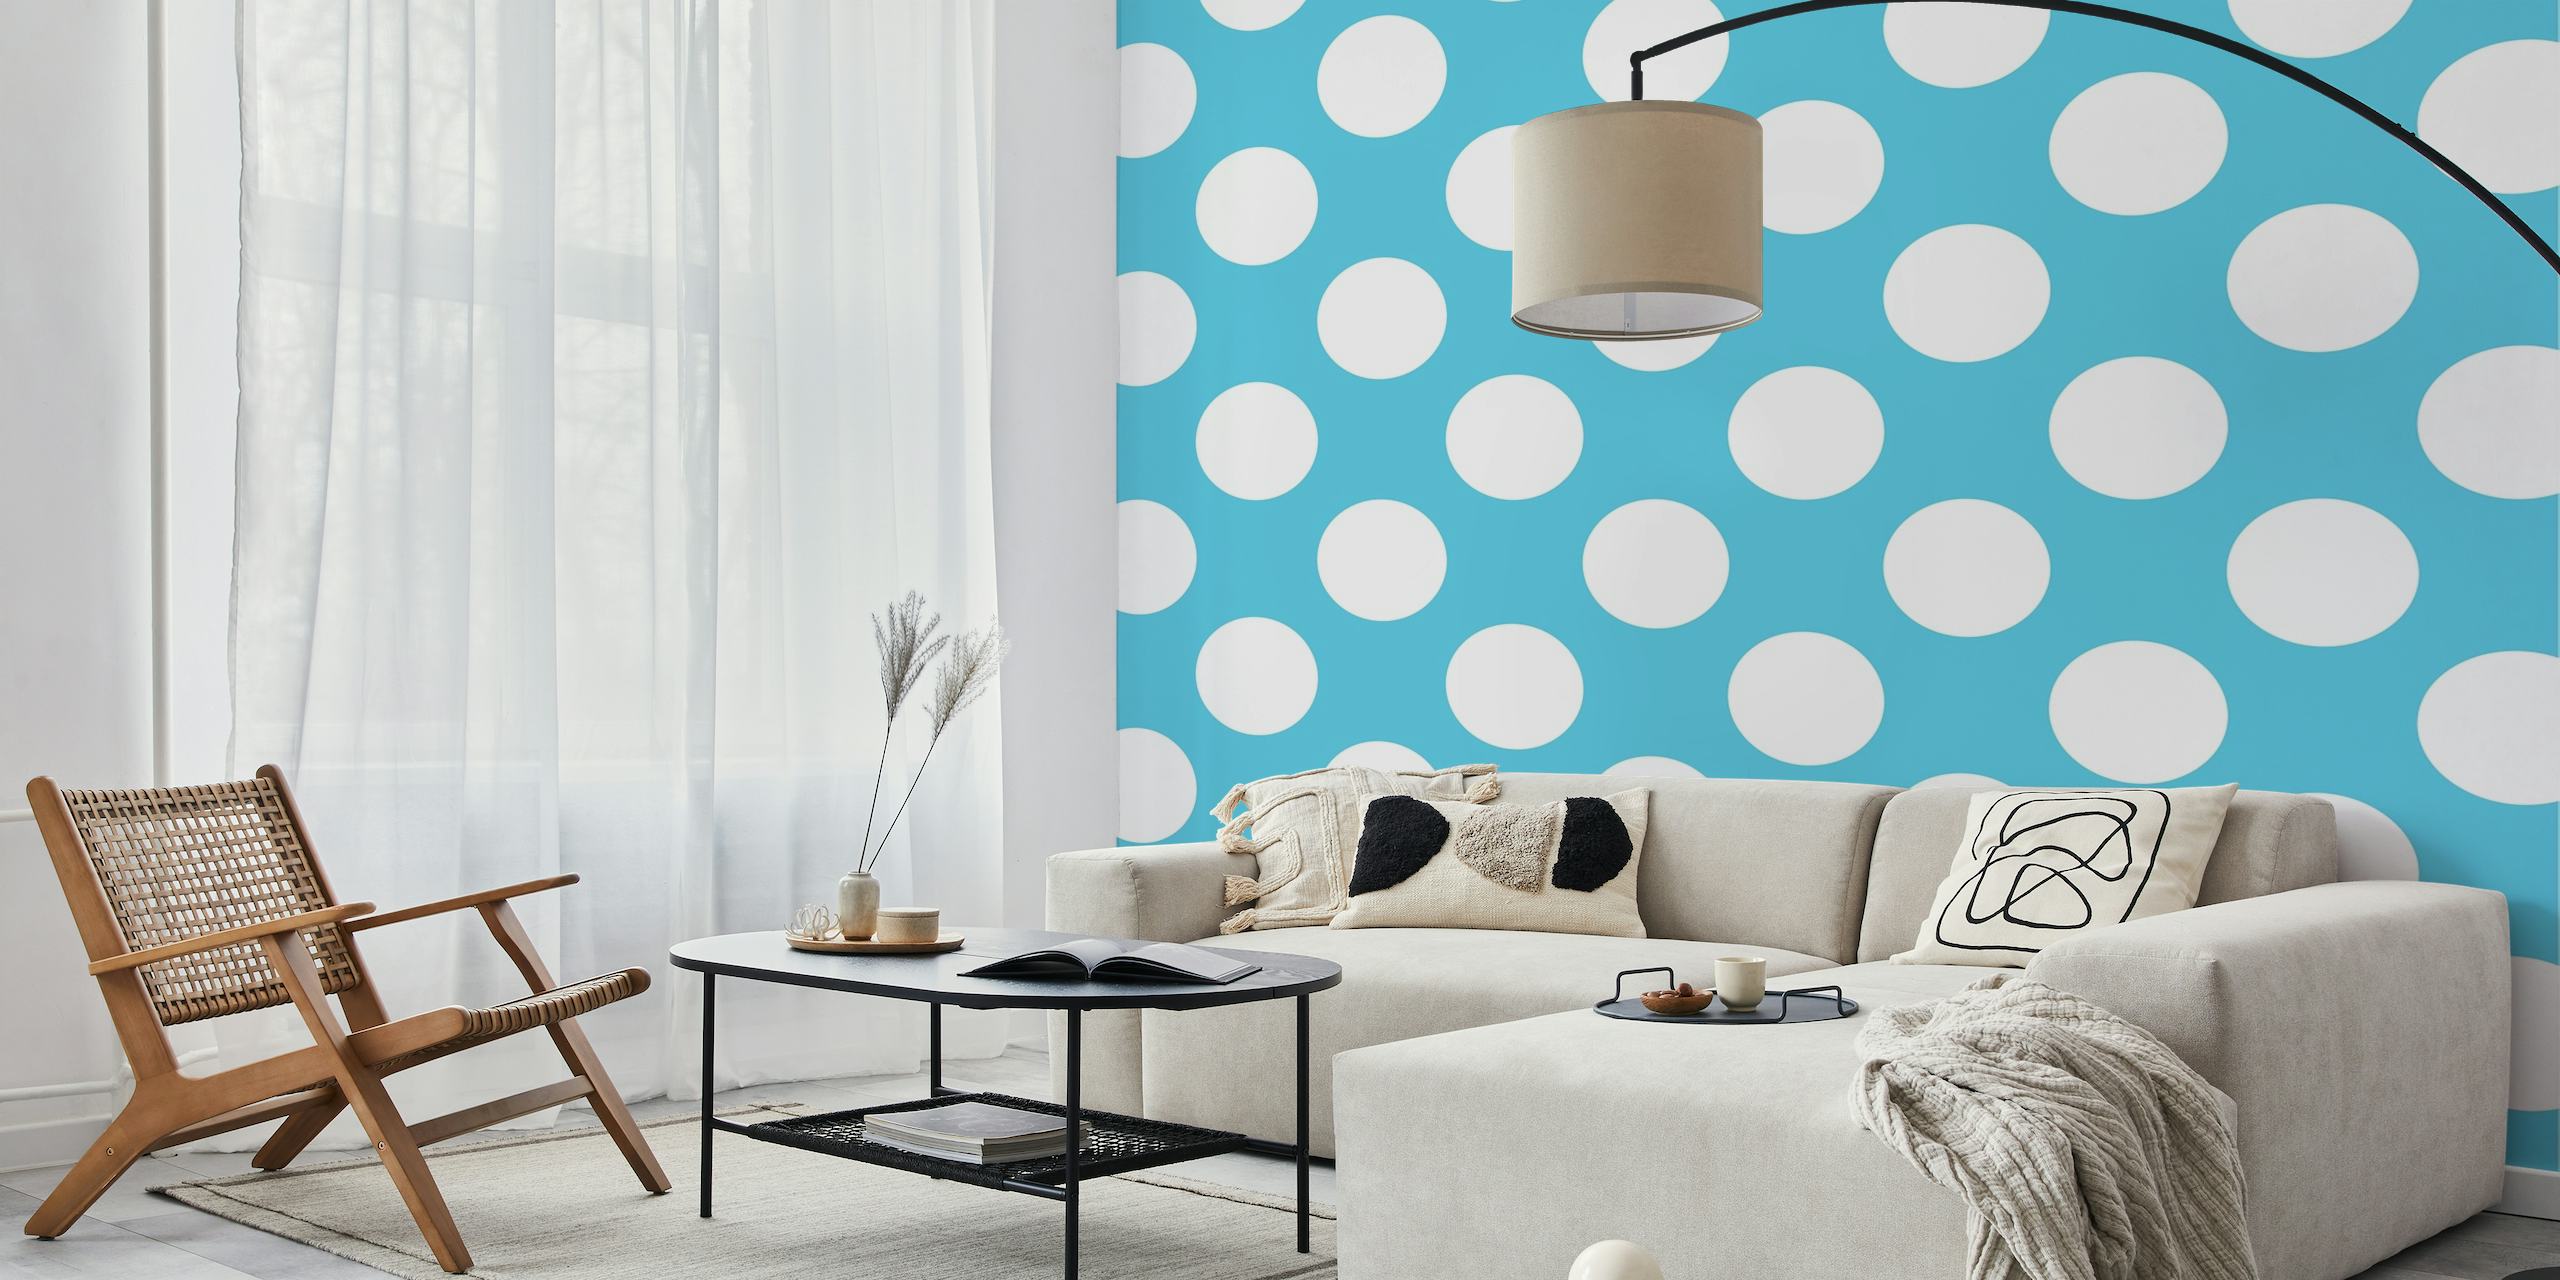 Sky blue polka dotted pattern ταπετσαρία